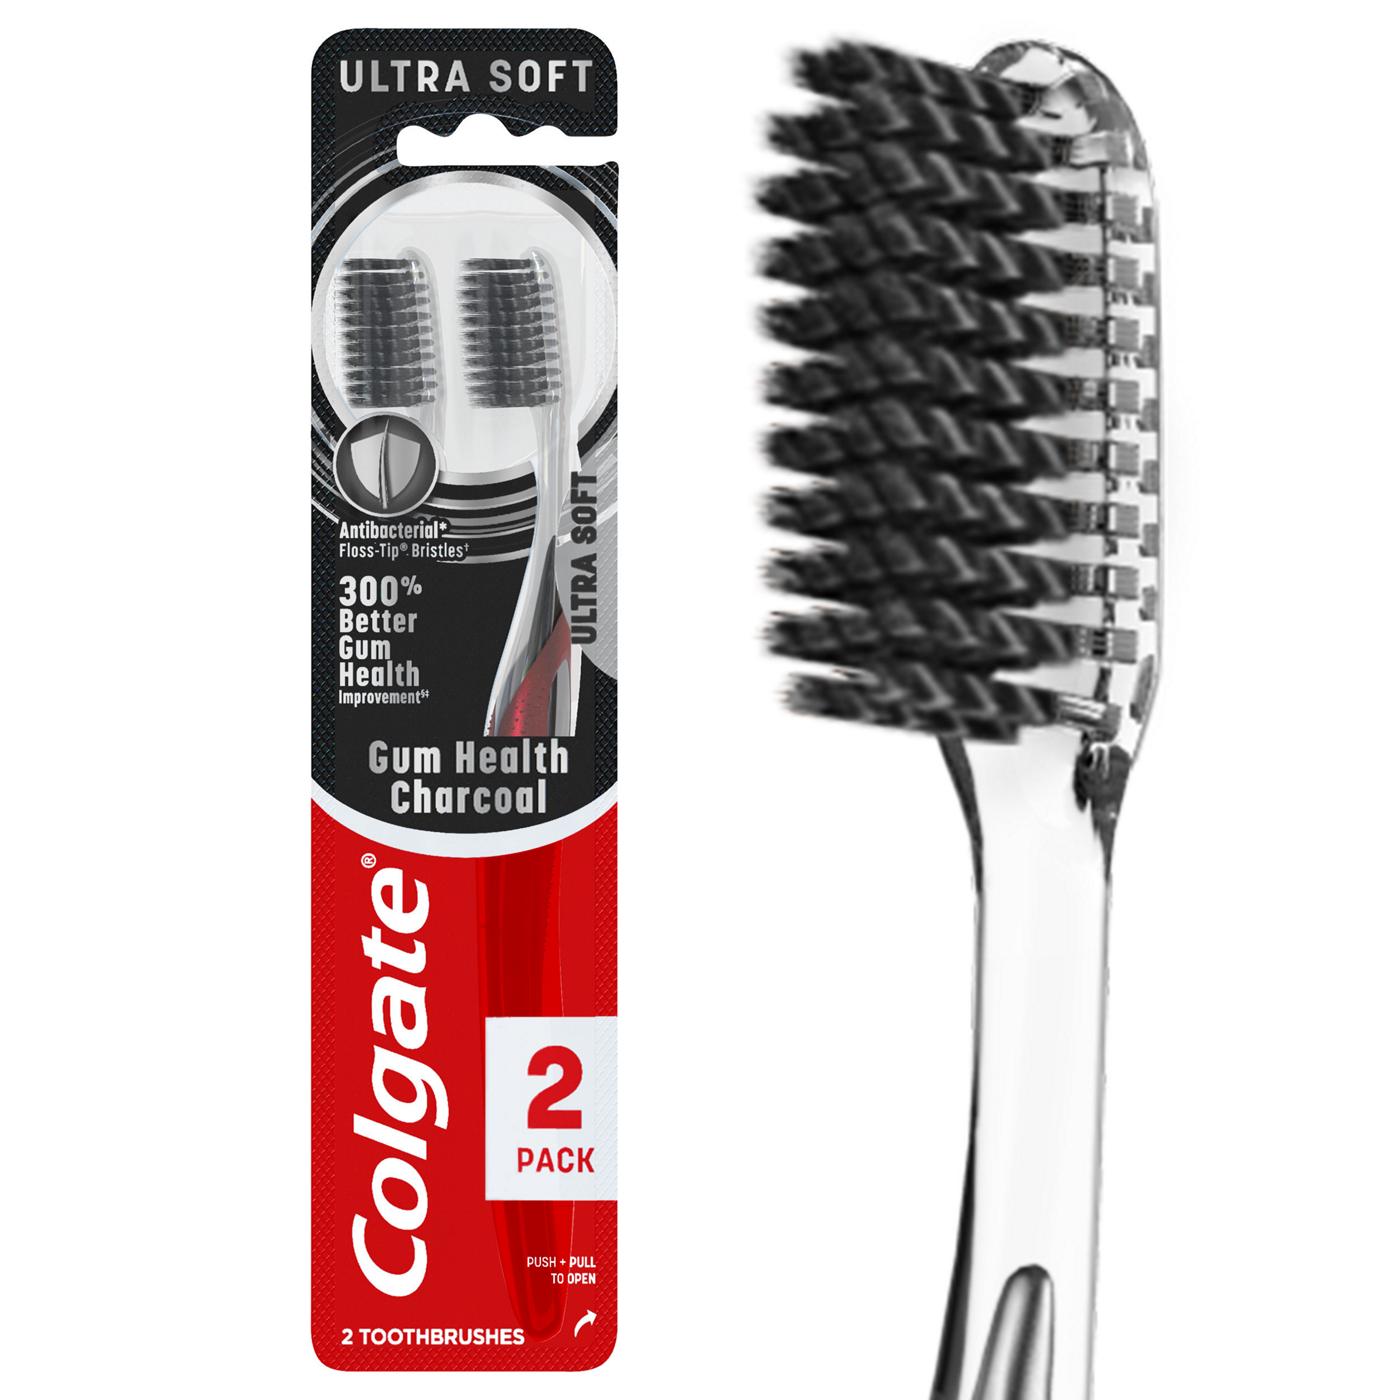 Colgate Gum Health Charcoal Toothbrushes - Ultra Soft; image 3 of 4